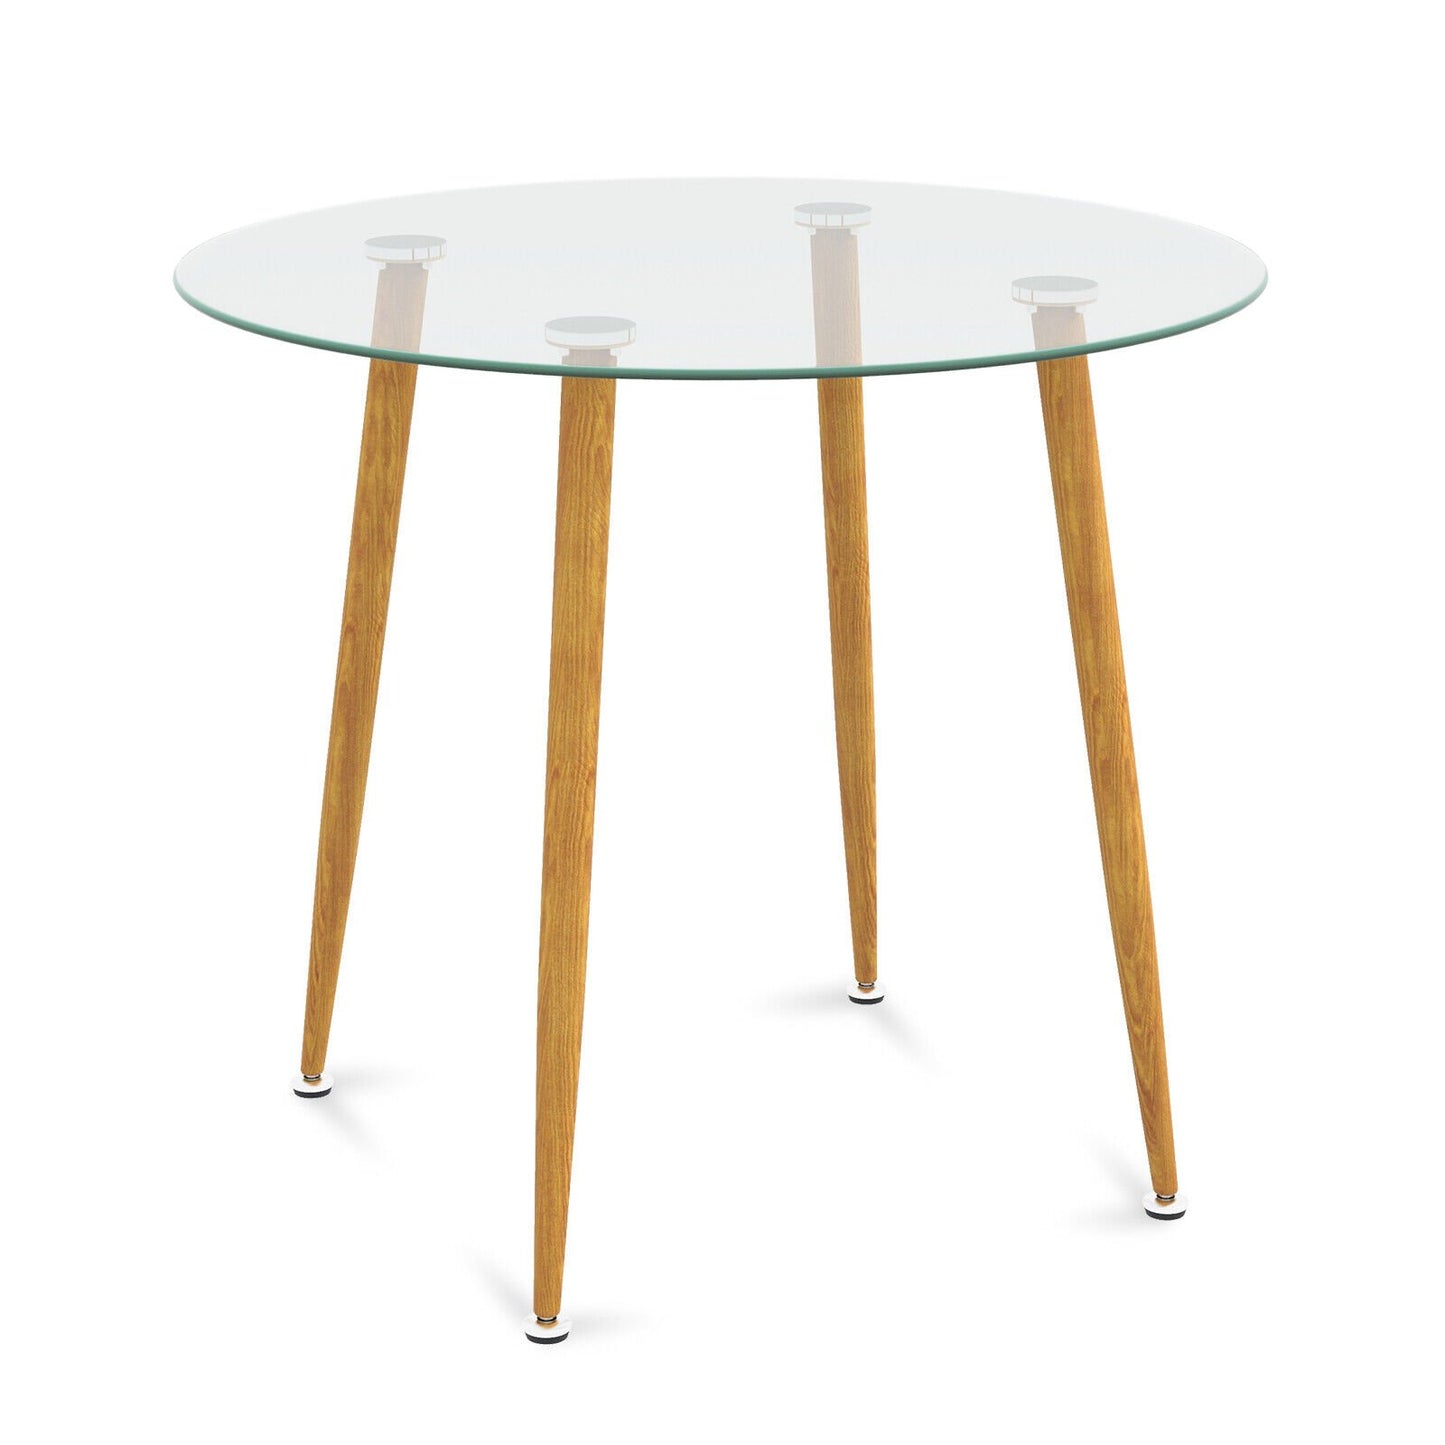 Round Glass Dining Table Leisure Coffee Table with Metal Legs, Natural